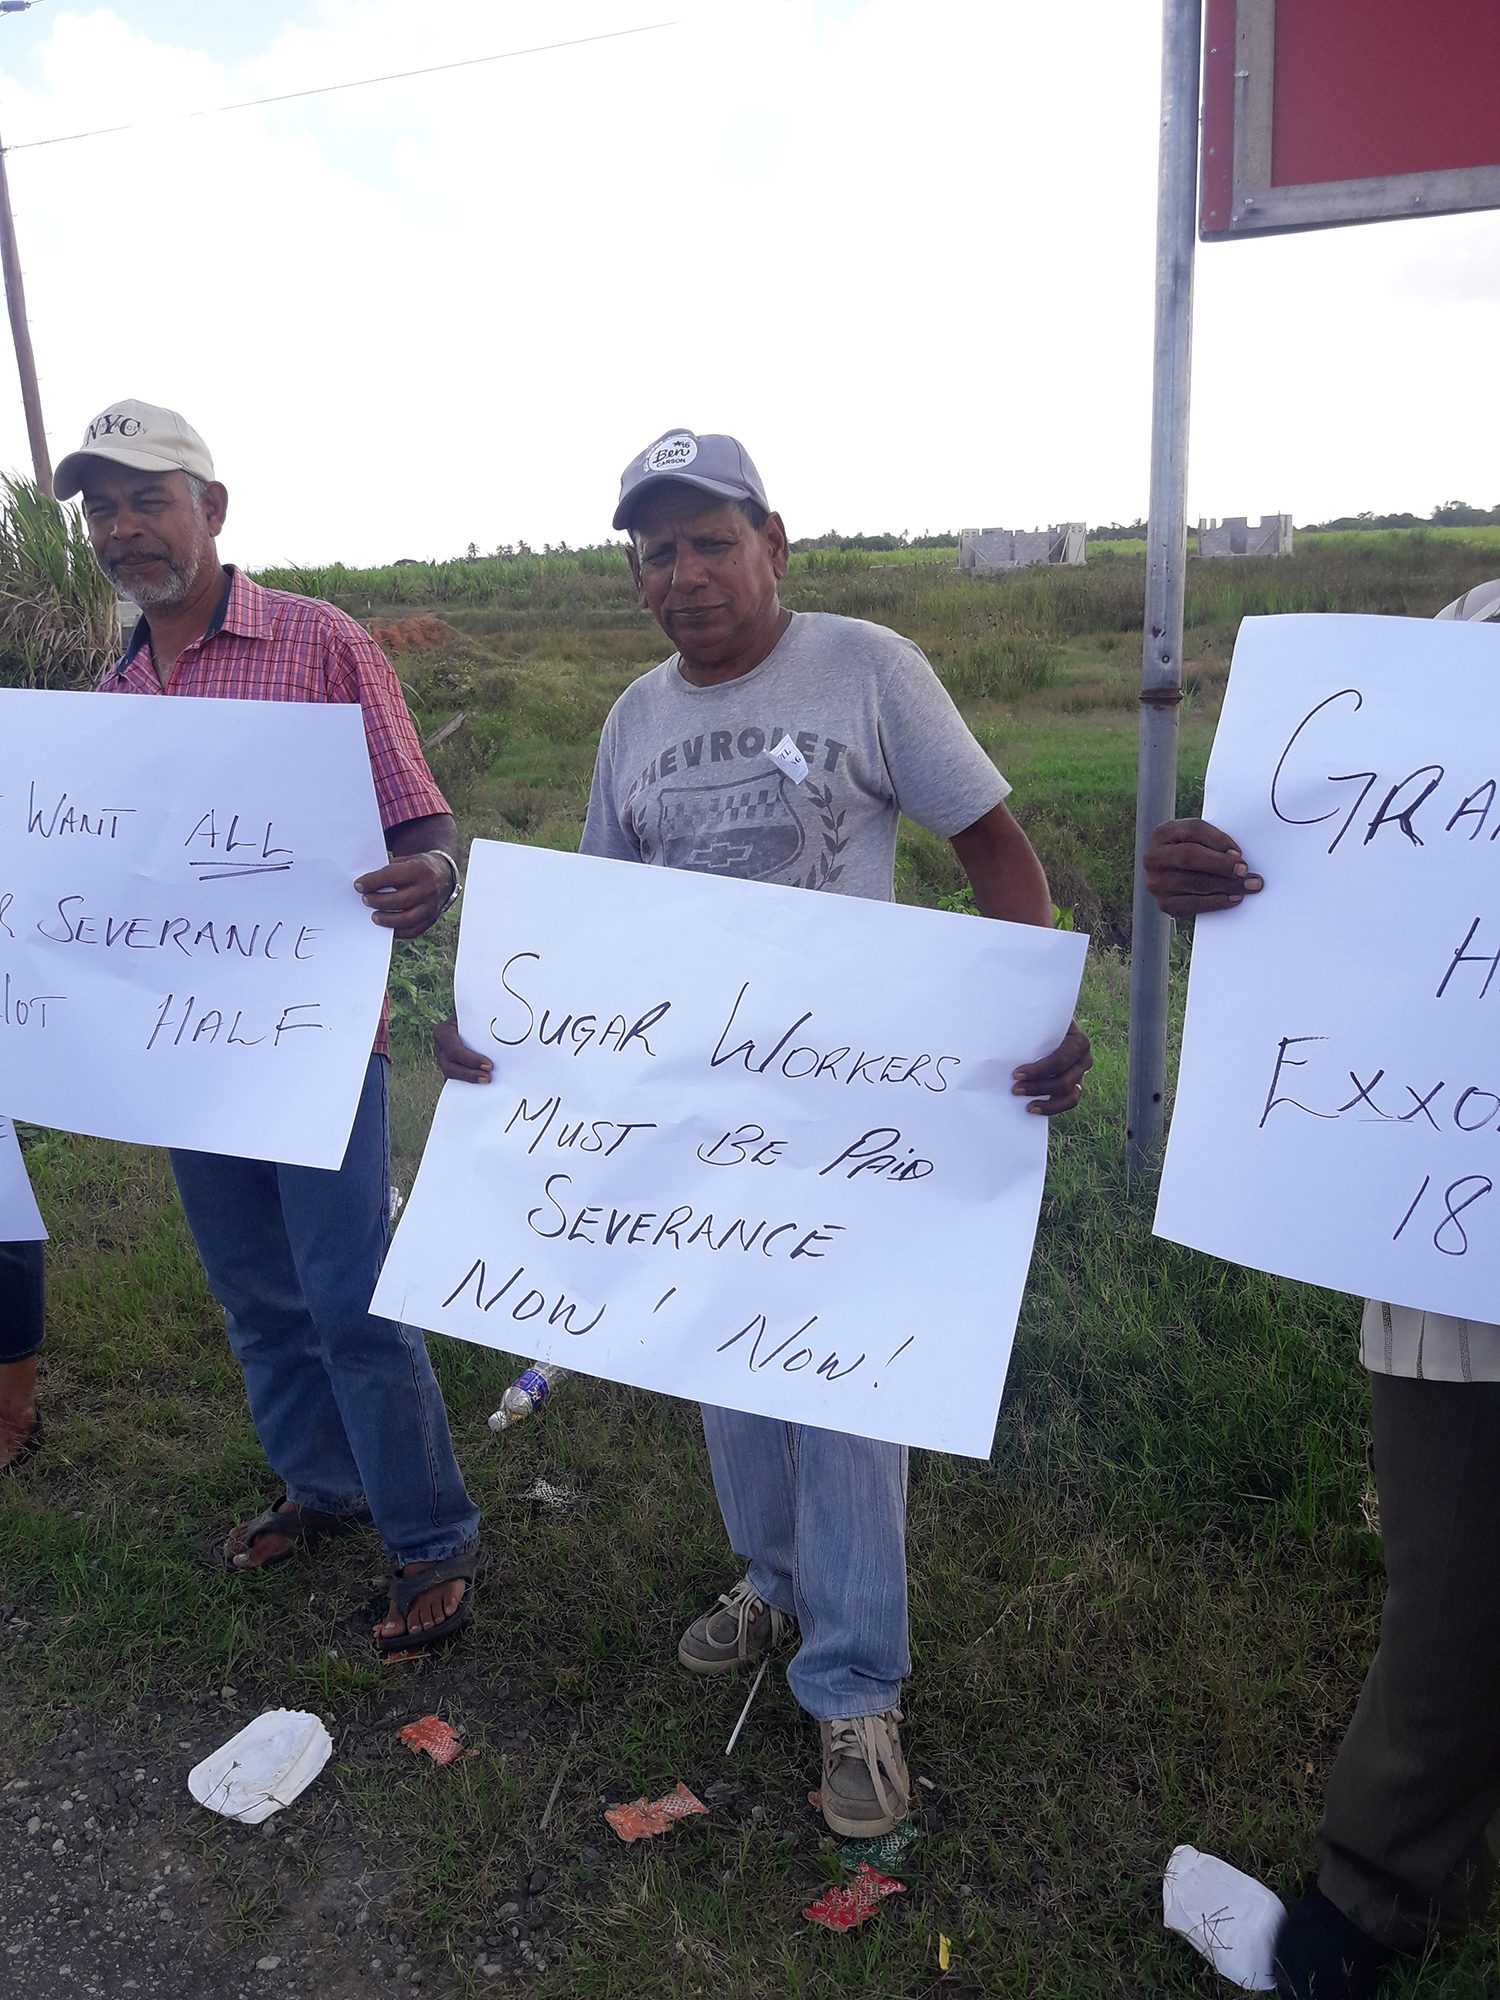 A protestor highlighting the need for full severance payment for laid off sugar workers